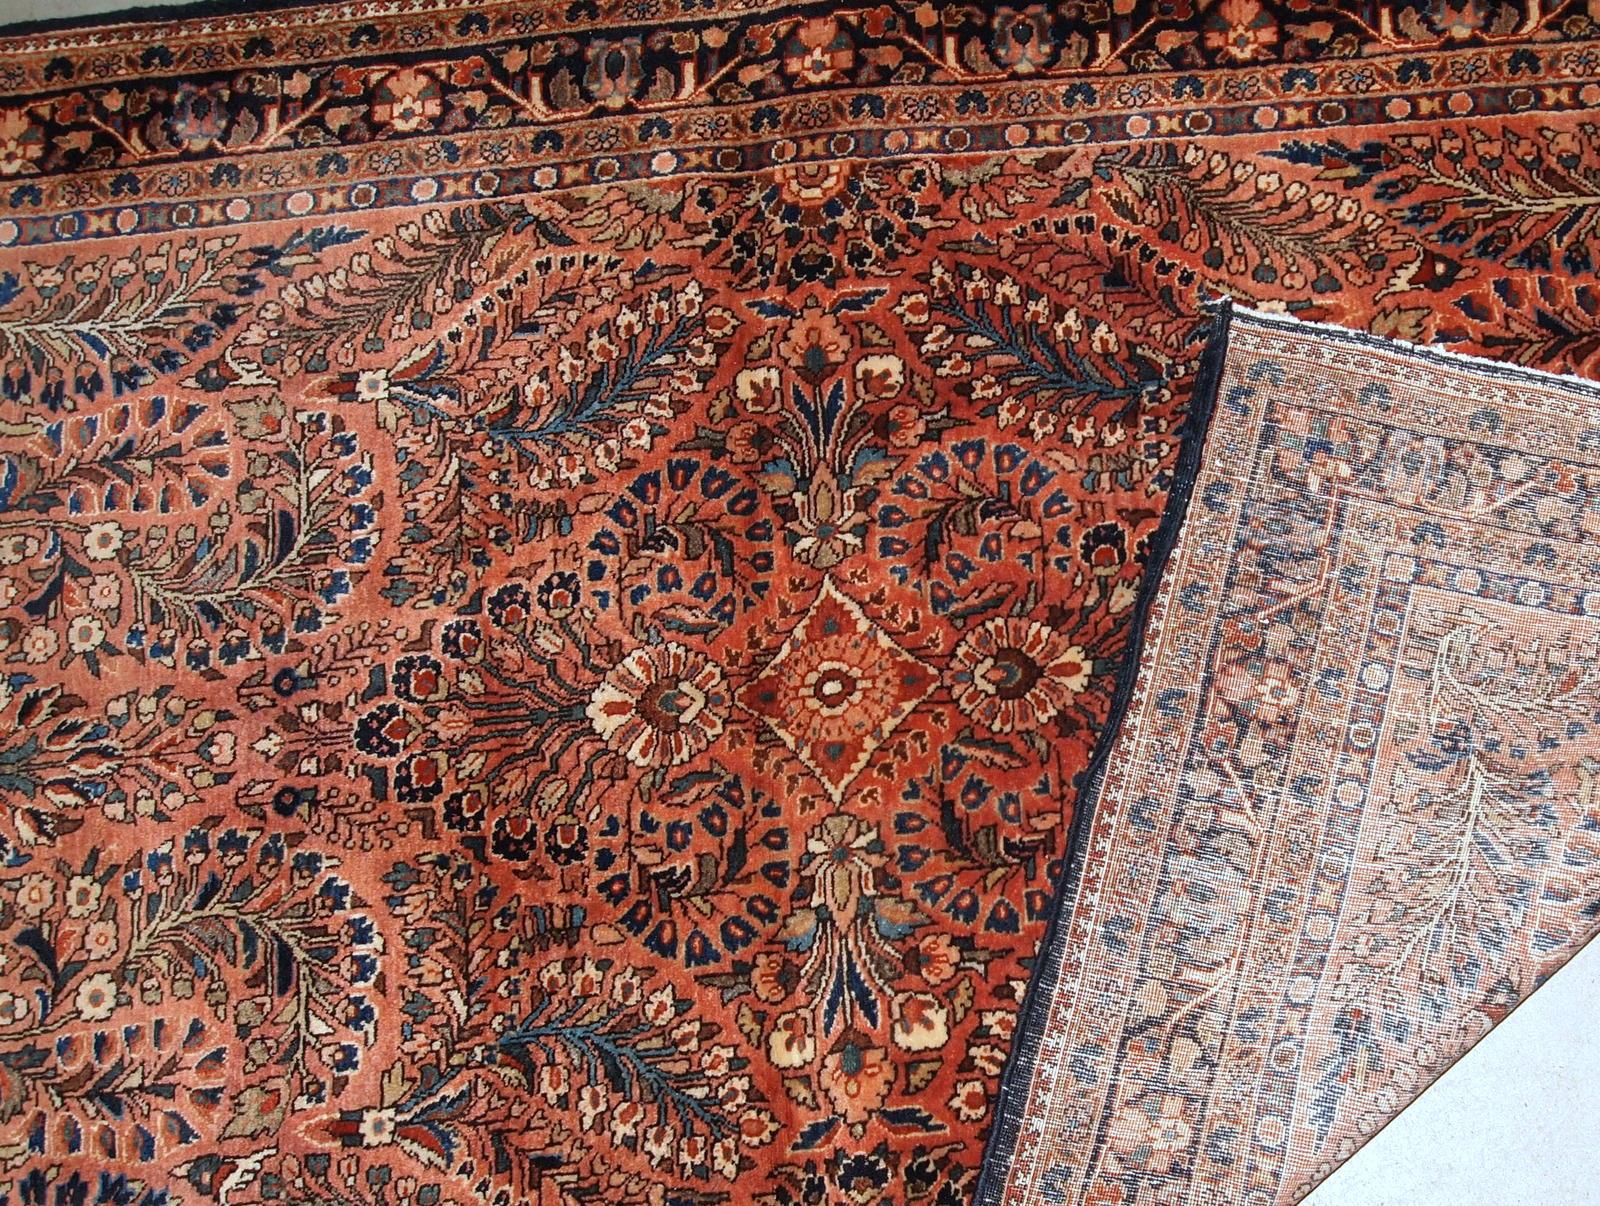 Handmade antique Sarouk style rug in original good condition. The rug is from the beginning of 20th century made in red wool.

- Condition: original good,

- circa: 1920s,

- Size: 3.6' x 5.5' (110cm x 167cm),

- Material: wool,

- Country